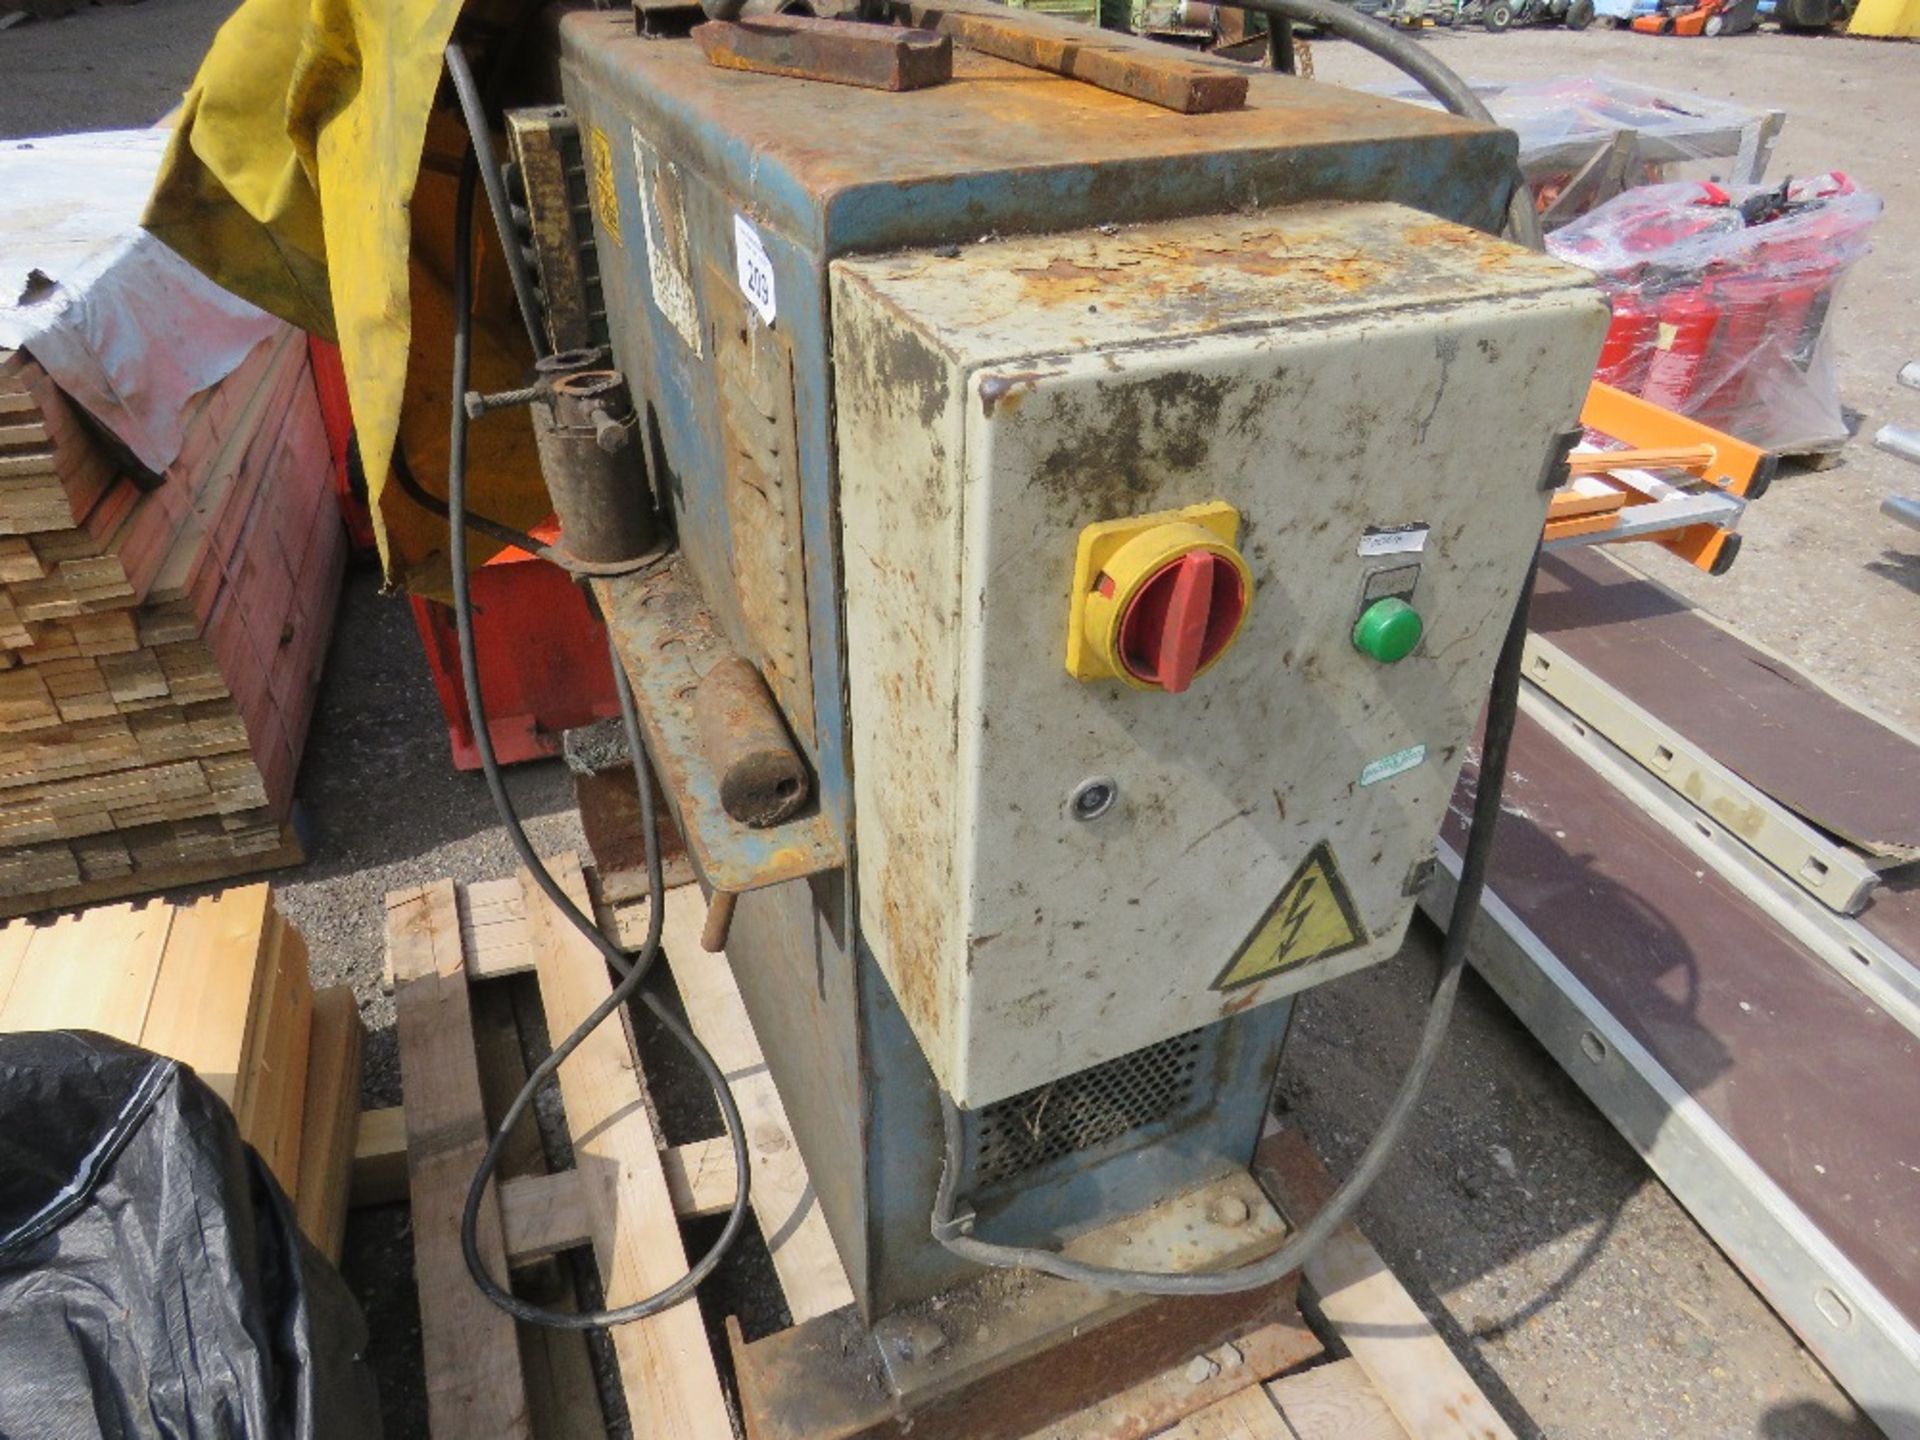 ELDAN M3 CABLE STRIPPER UNIT, 3 PHASE. WORKING WHEN REMOVED. NO VAT ON HAMMER PRICE. - Image 4 of 6